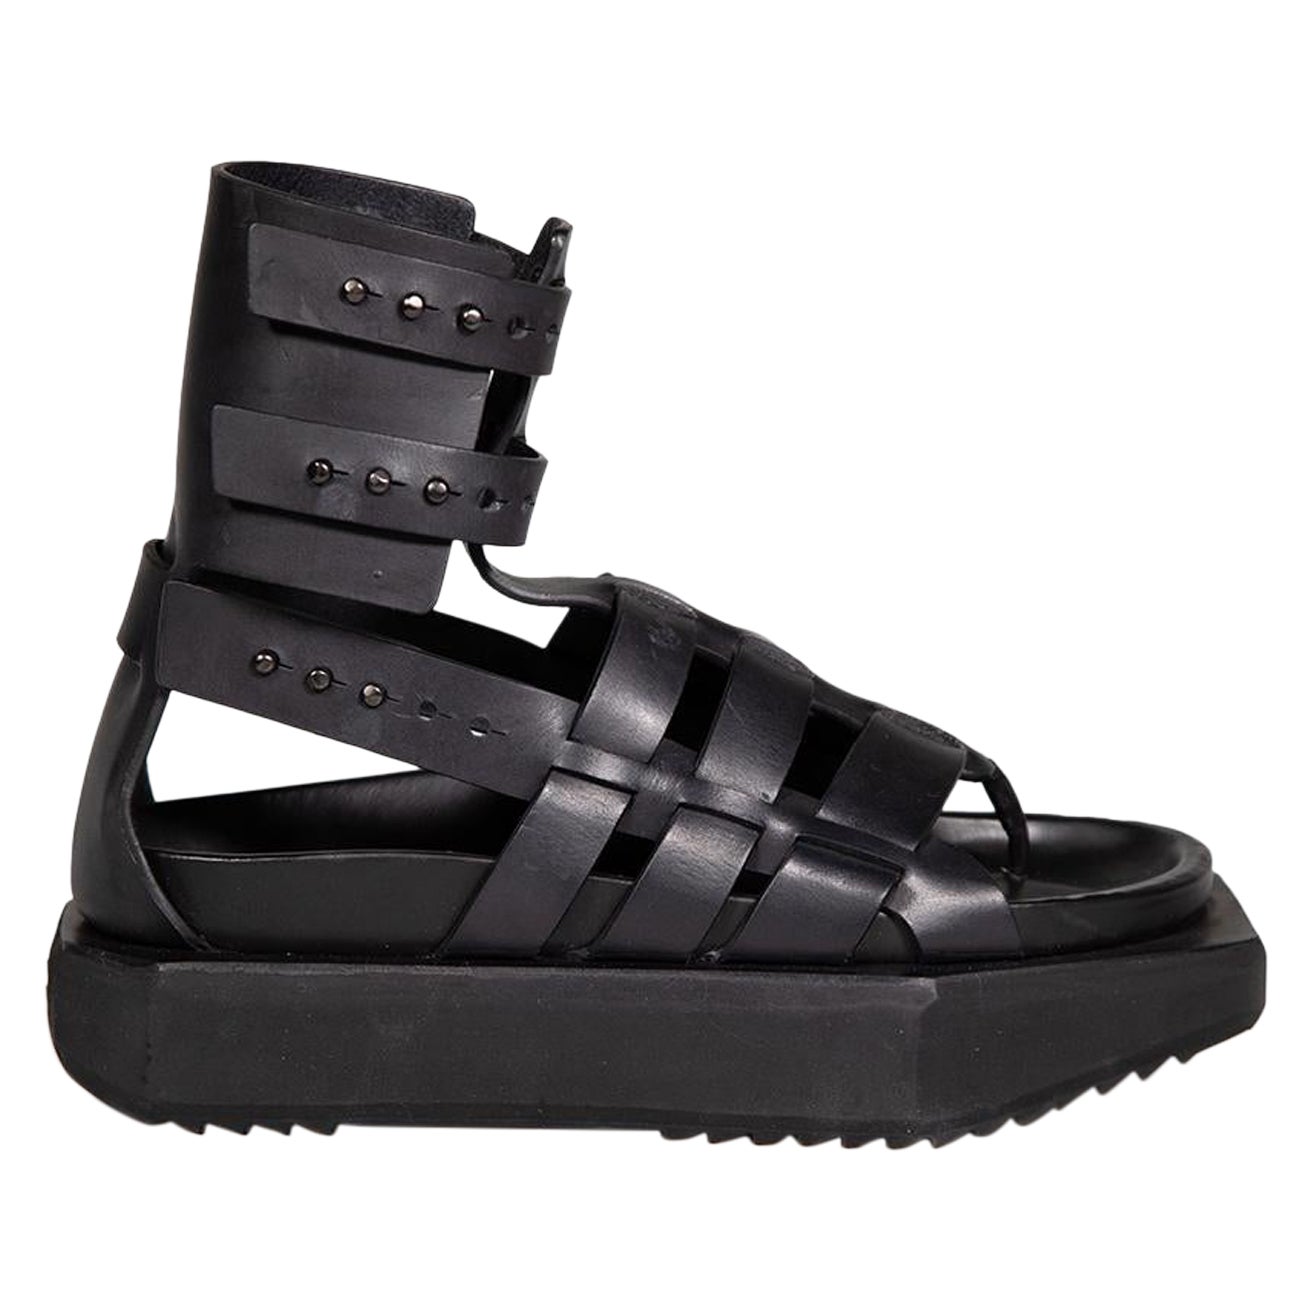 Rick Owens 2016 S/S Black Leather Turbo Cyclop Sandals Size IT 39 For Sale